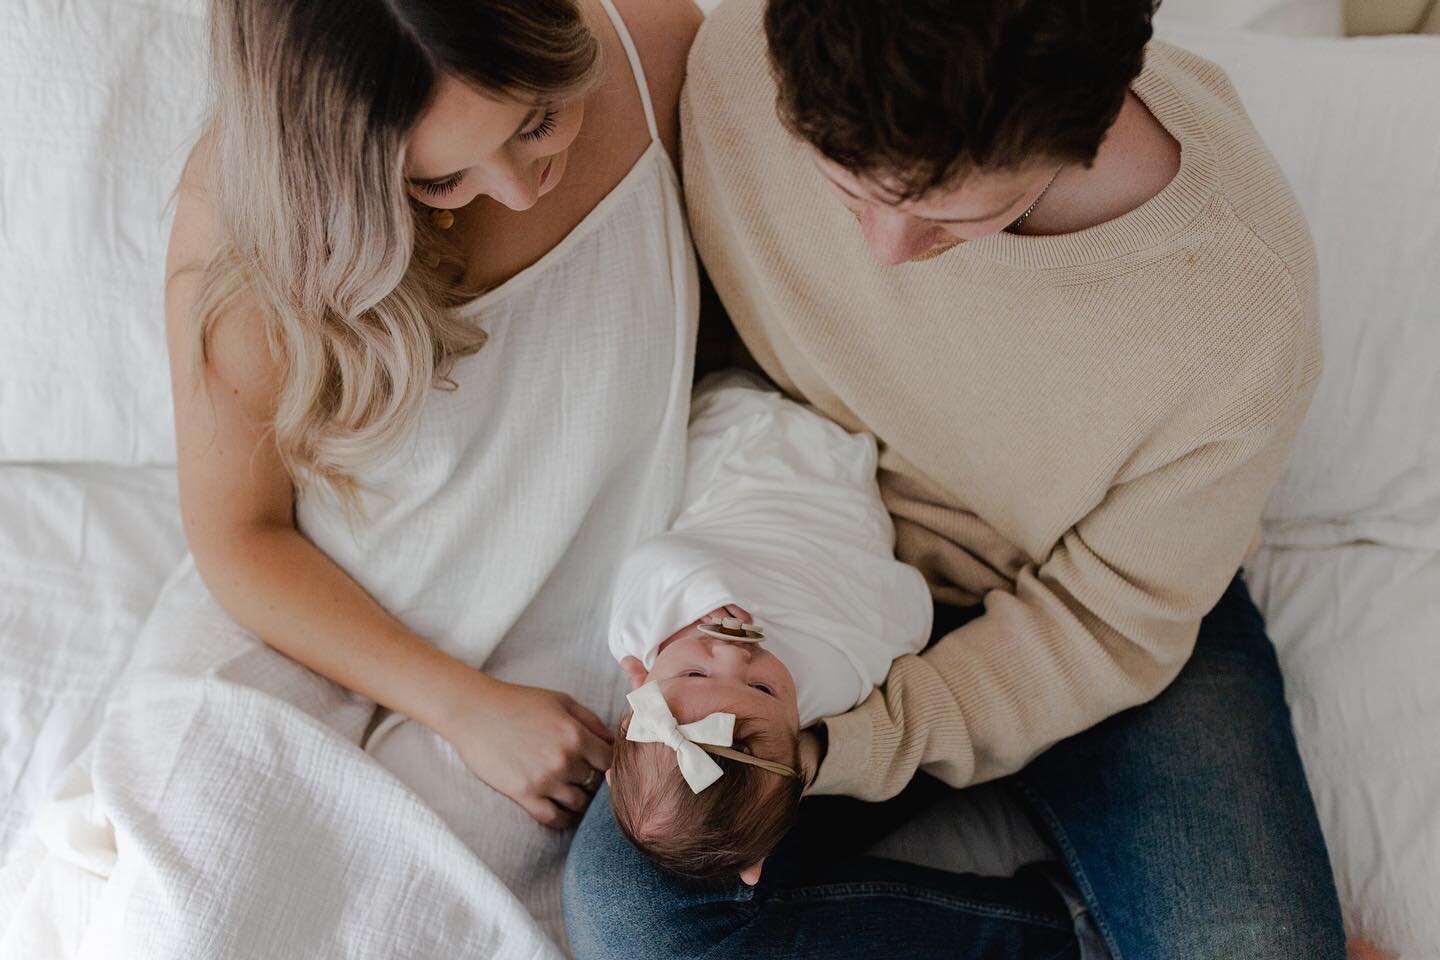 Last month Jared &amp; Beth welcomed sweet baby Vivienne into their lives and we got to capture these special memories in their home while she was still little! Newborn photos are so special because those moments pass soooo freaking fast! Looking bac